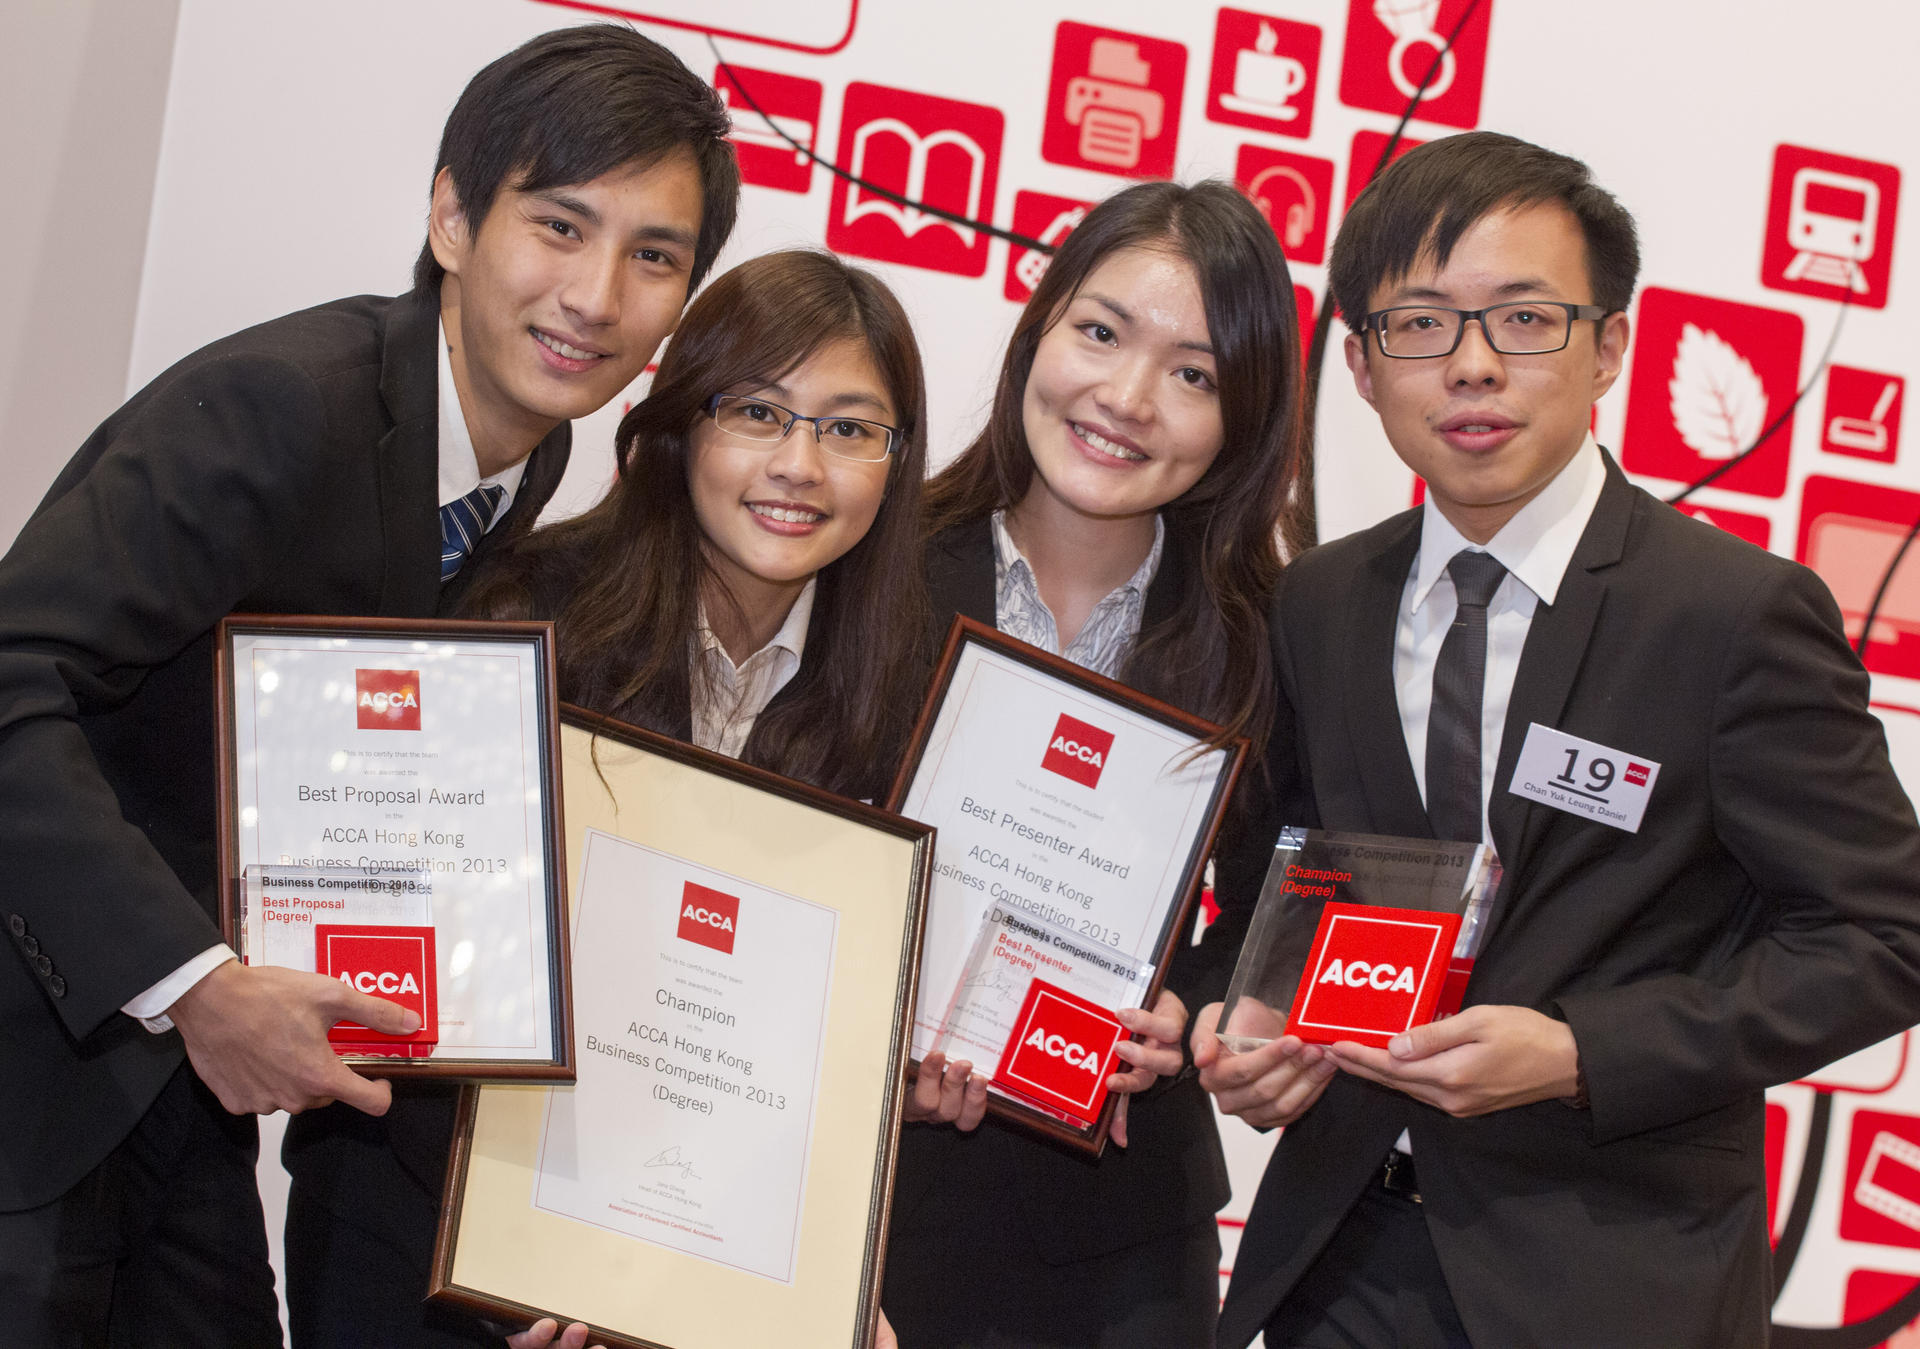 City University, the champion team of the 2013 ACCA Business Competition.